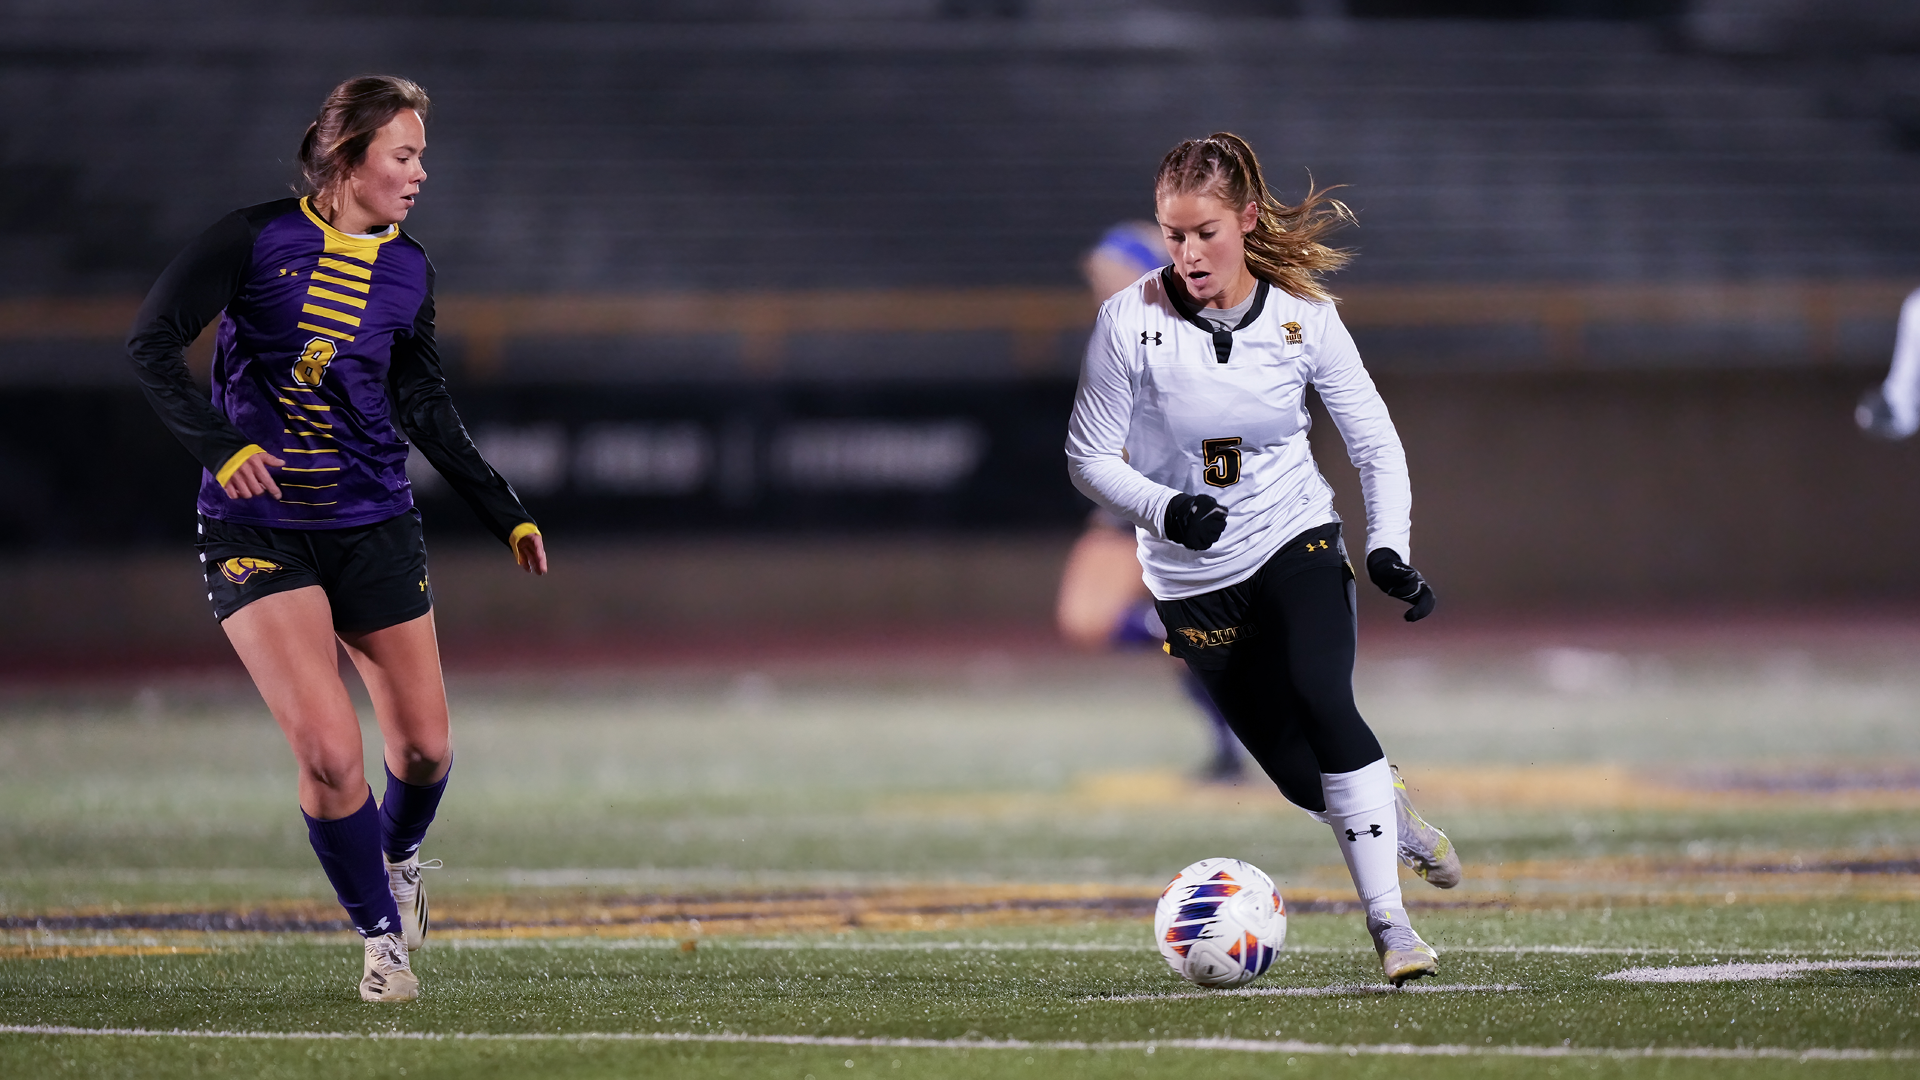 Alayna Clark scored in the 22nd minute of UW-Oshkosh's 3-1 loss to UW-Stevens Point on Oct. 31